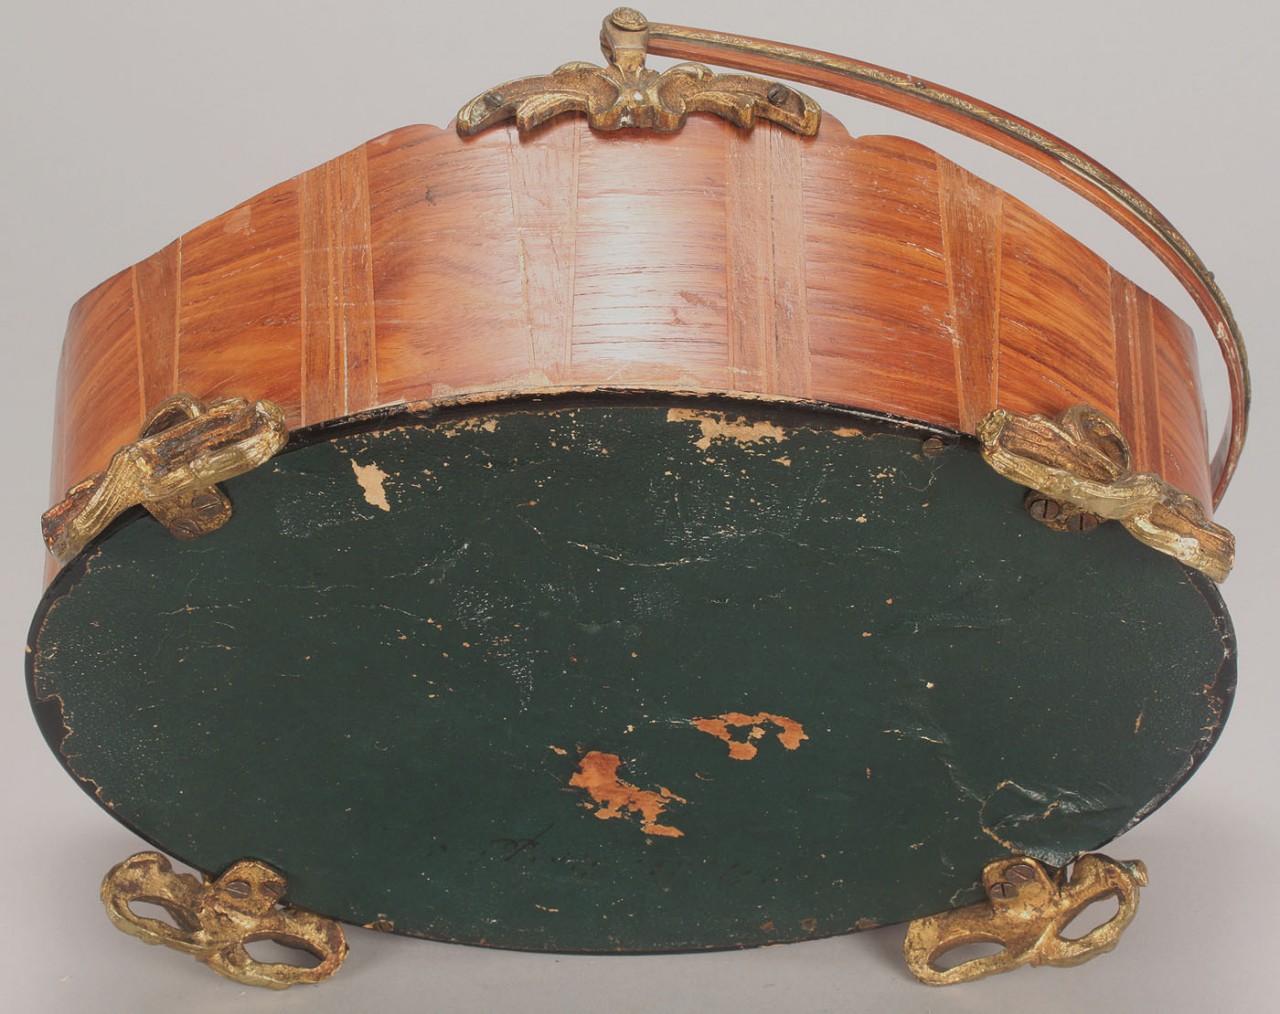 Lot 581: Marquetry basket with assorted sewing notions